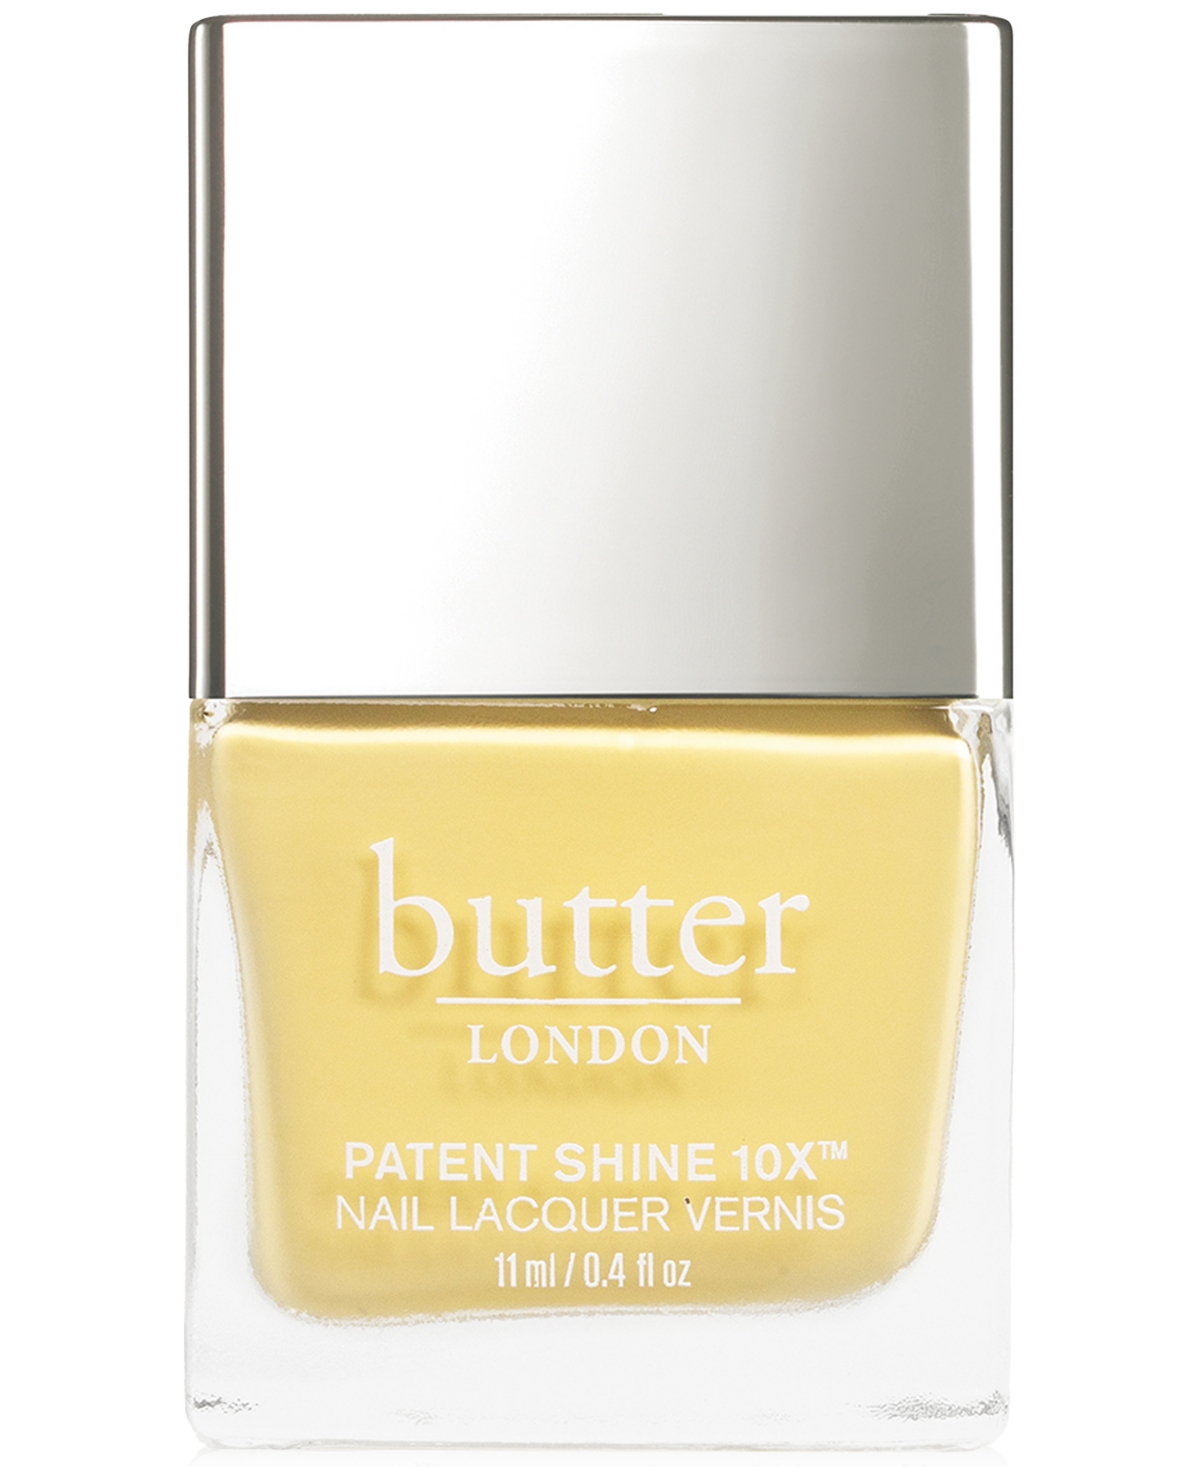 Butter London Patent Shine 10x Nail Lacquer In Bit Of Sunshine